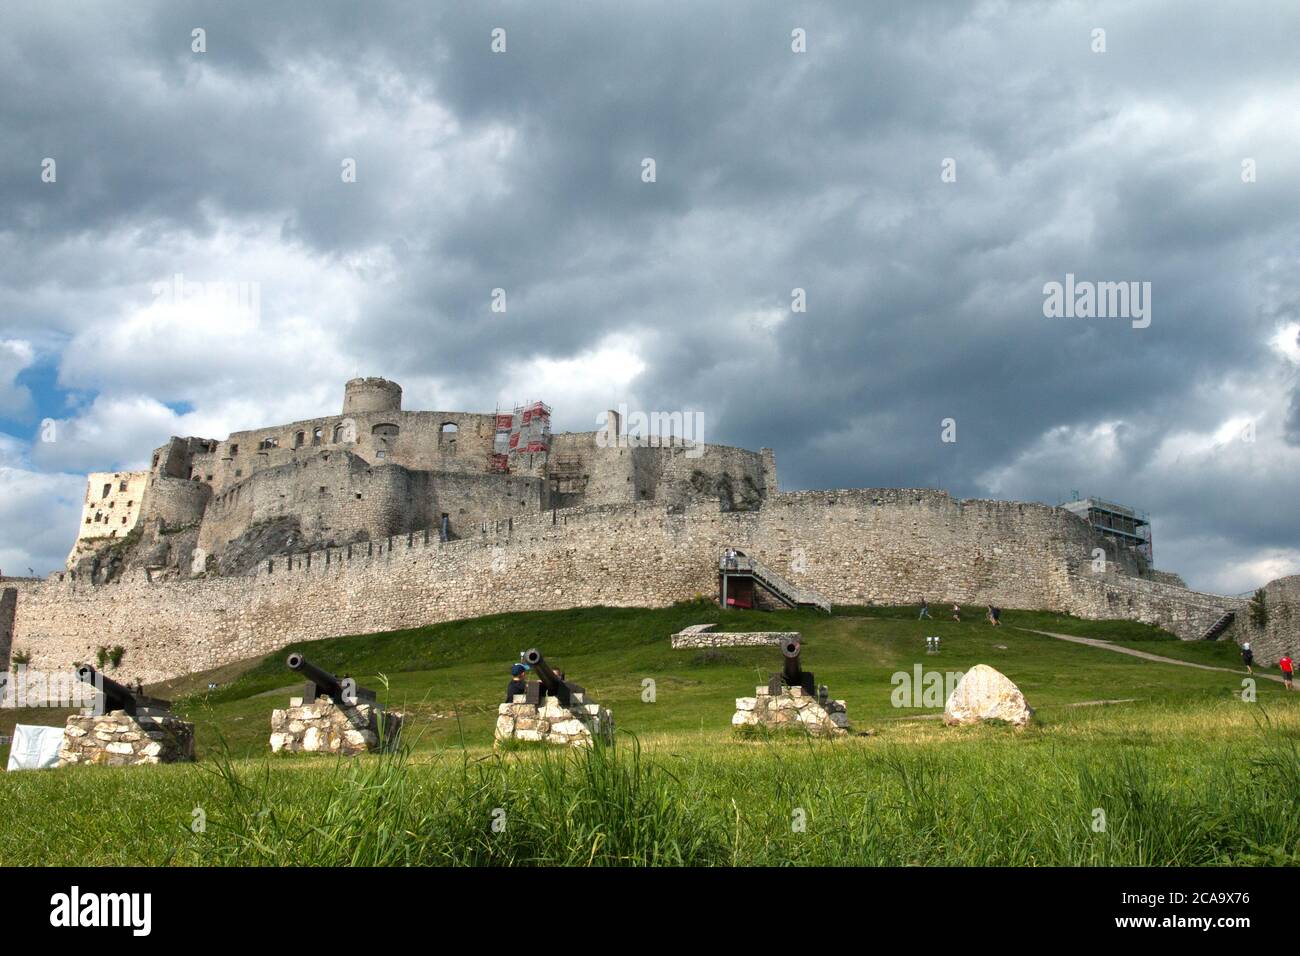 Spišské Podhradie Slovakia July 31, 2020 A row of cannons were awaited the attackers in the Middle Ages at the Spissky hrad Szepes vár. Stock Photo